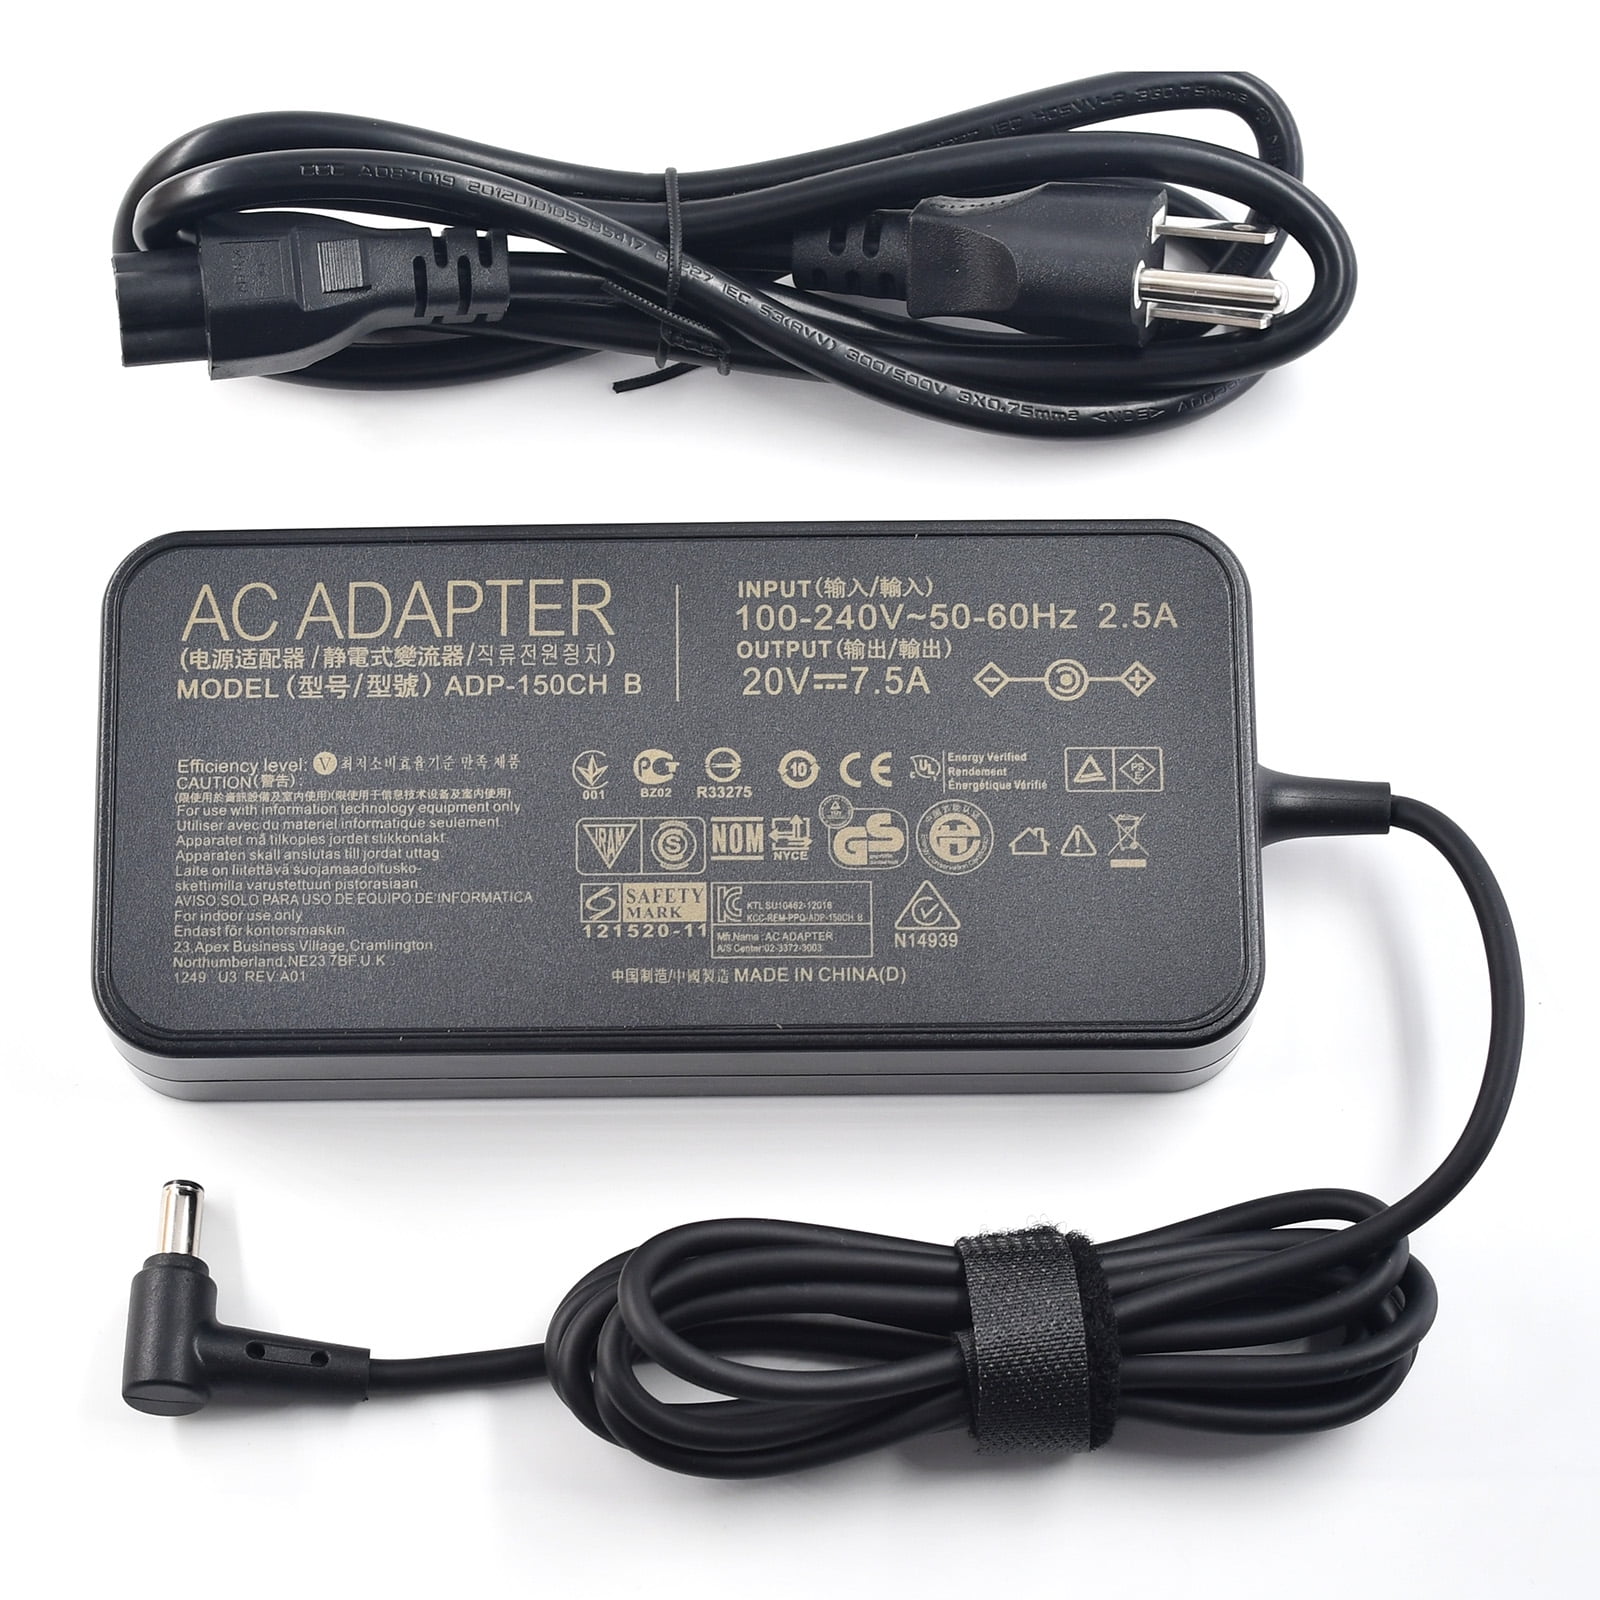 150W 20V 7.5A Laptop Charger for ASUS TUF A15 FA506 A17 ADP-150CH B 6.0*3.7mm AC Adapter for ASUS Laptop Walmart.com